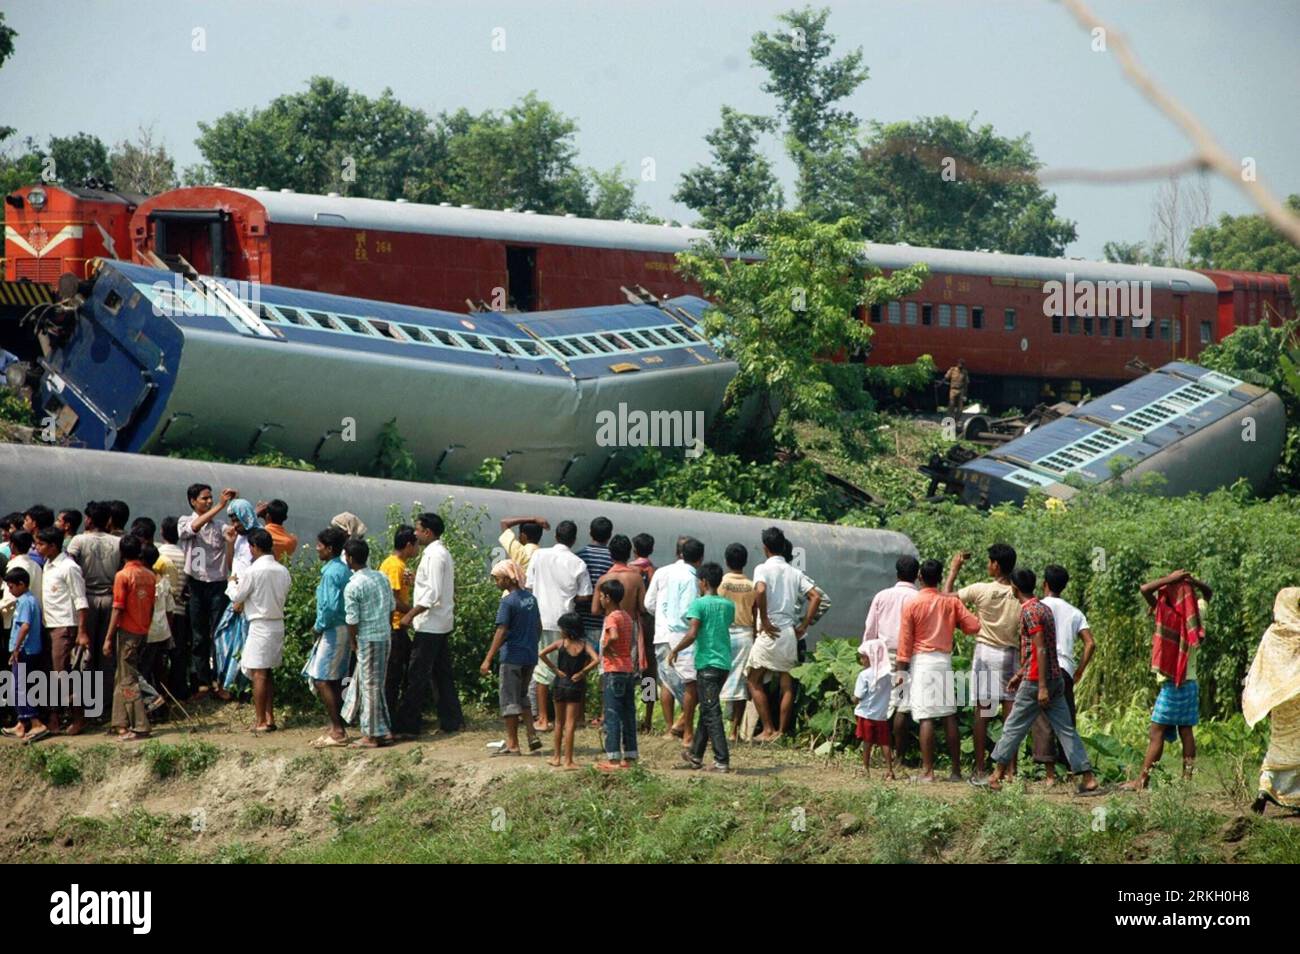 Bildnummer: 55672401  Datum: 31.07.2011  Copyright: imago/Xinhua (110801) -- CALCUTTA, Aug. 1, 2011 (Xinhua) -- Indian Bystanders watch as rescue workers attend to the scene of a train crash at Jamirghata, some 350km away from Calcutta, capital of eastern Indian state West Bengal on July, 31, 2011. The death toll in the train collision Sunday evening in the eastern Indian state West Bengal has risen to three while 50 others were injured, said railway officials on Monday. (Xinhua Photo/Tumpa Mondal)(axy) INDIA-WEST BENGAL-TRAIN CRASH PUBLICATIONxNOTxINxCHN Gesellschaft Zugunglück Unglück Unfall Stock Photo